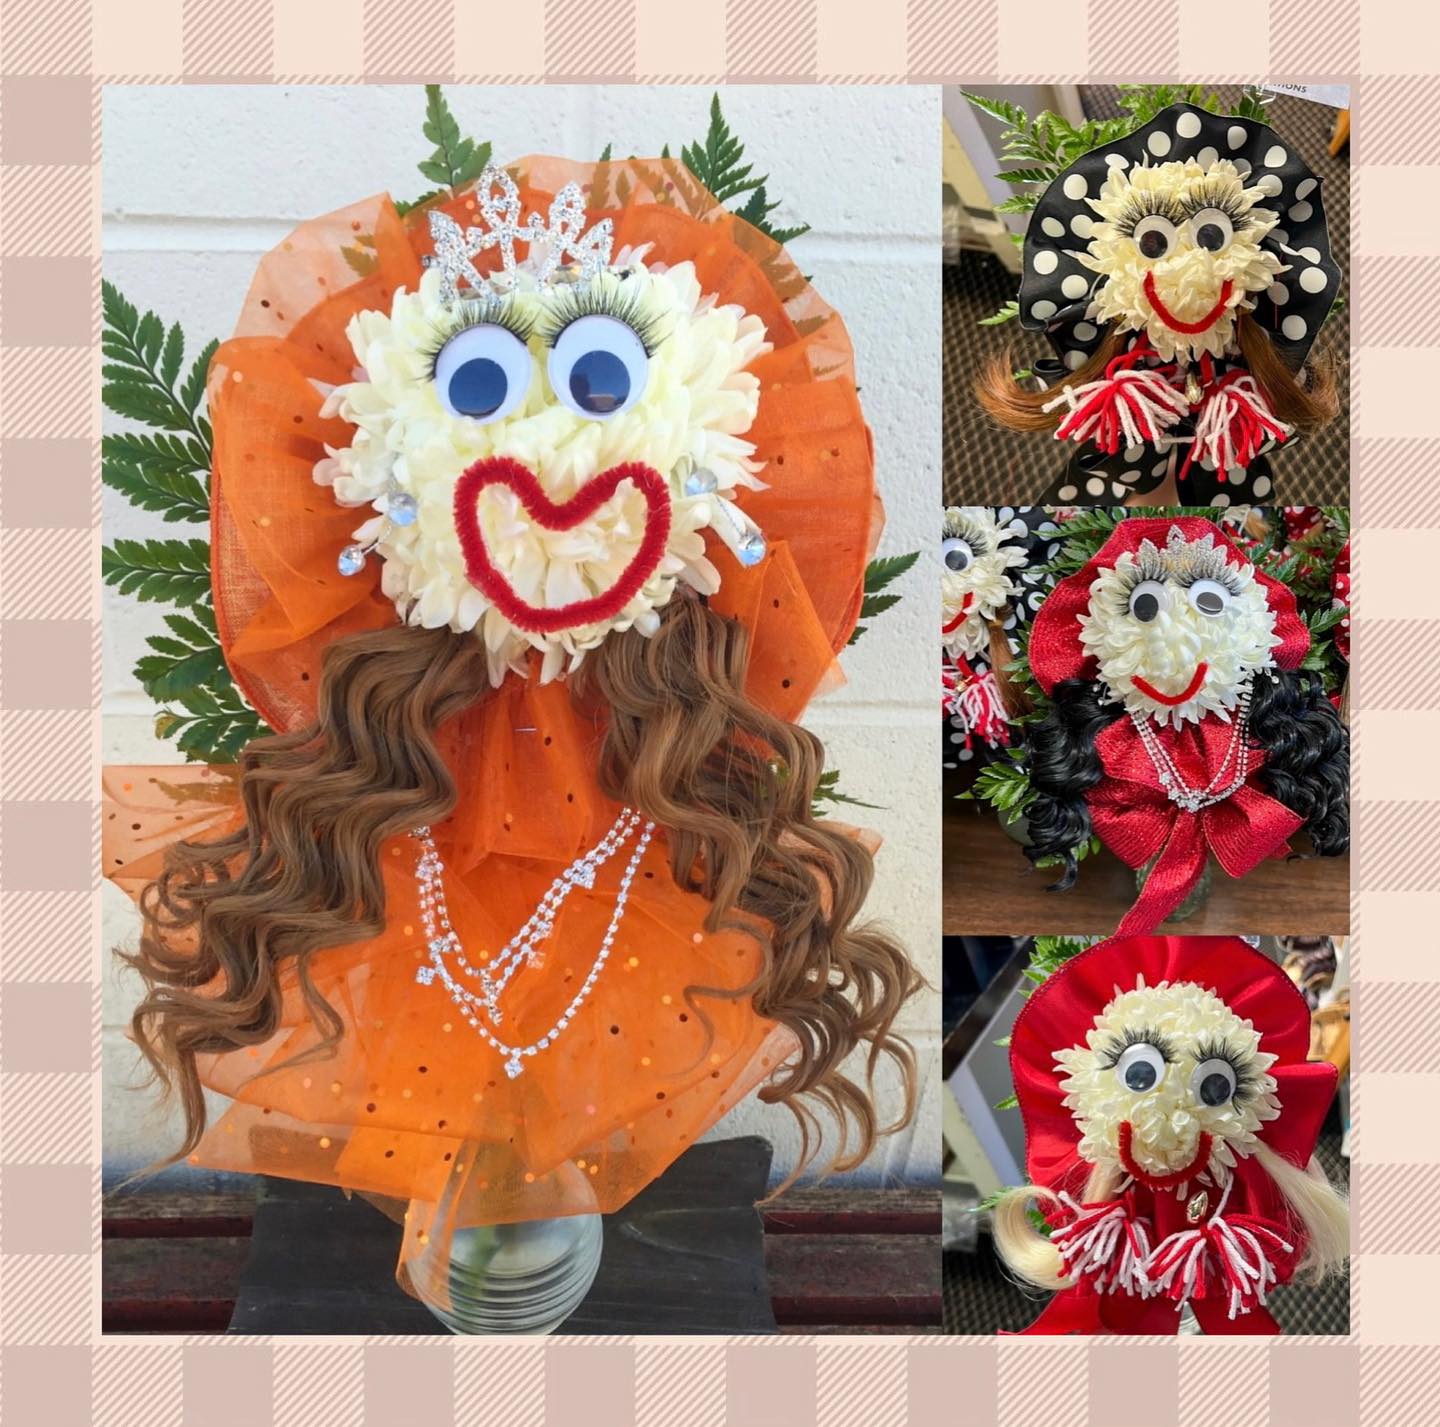 Floral Creations 1503 College Ave, Jackson Alabama 36545